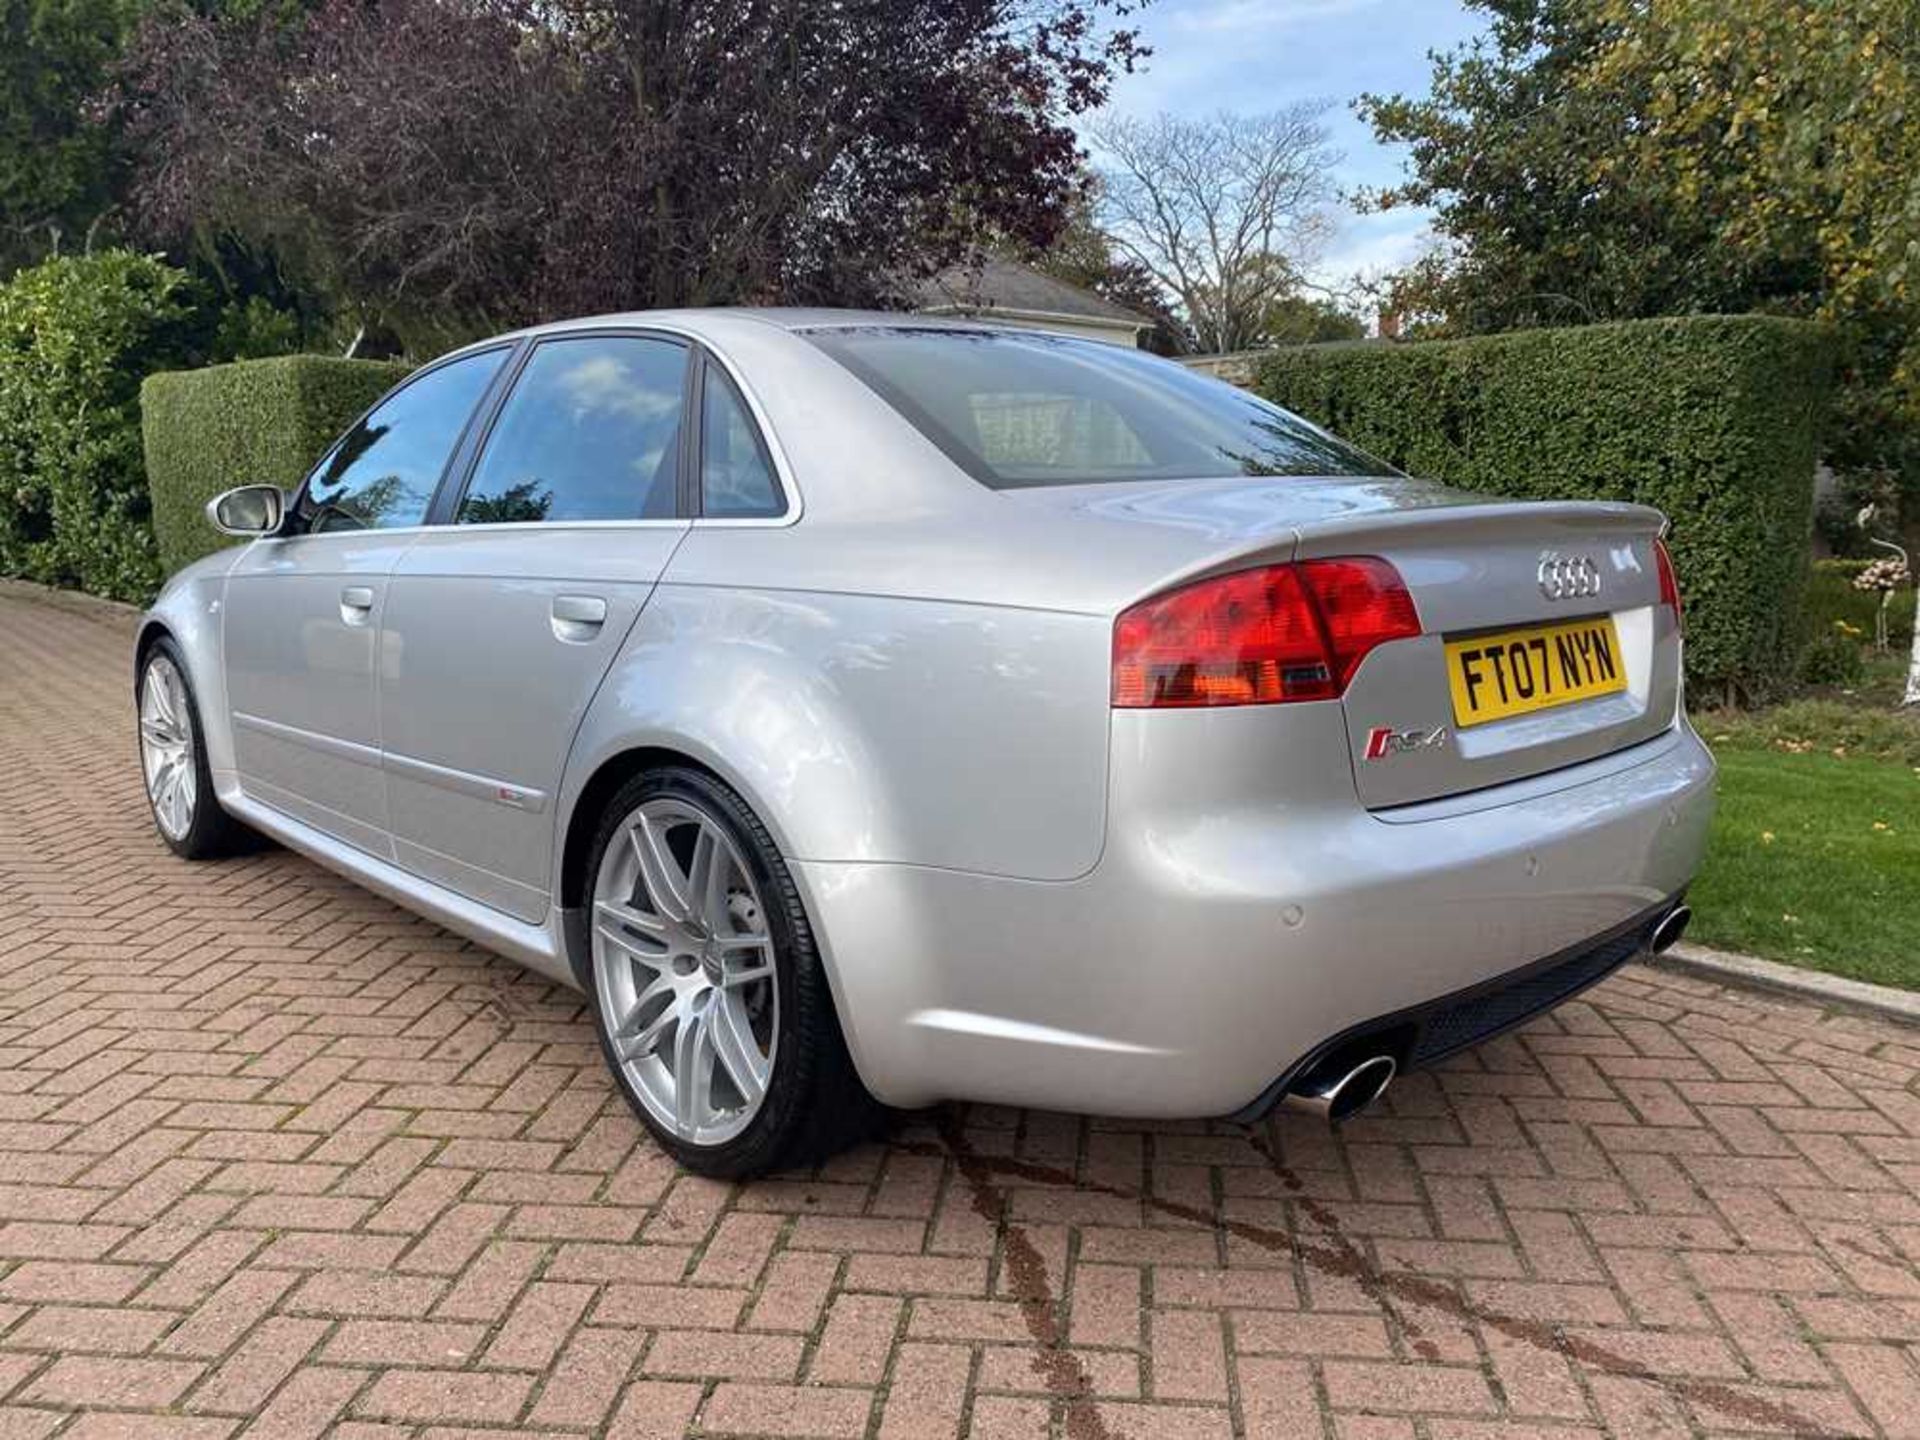 2007 Audi RS4 Saloon One owner and just c.60,000 miles from new - Image 13 of 86